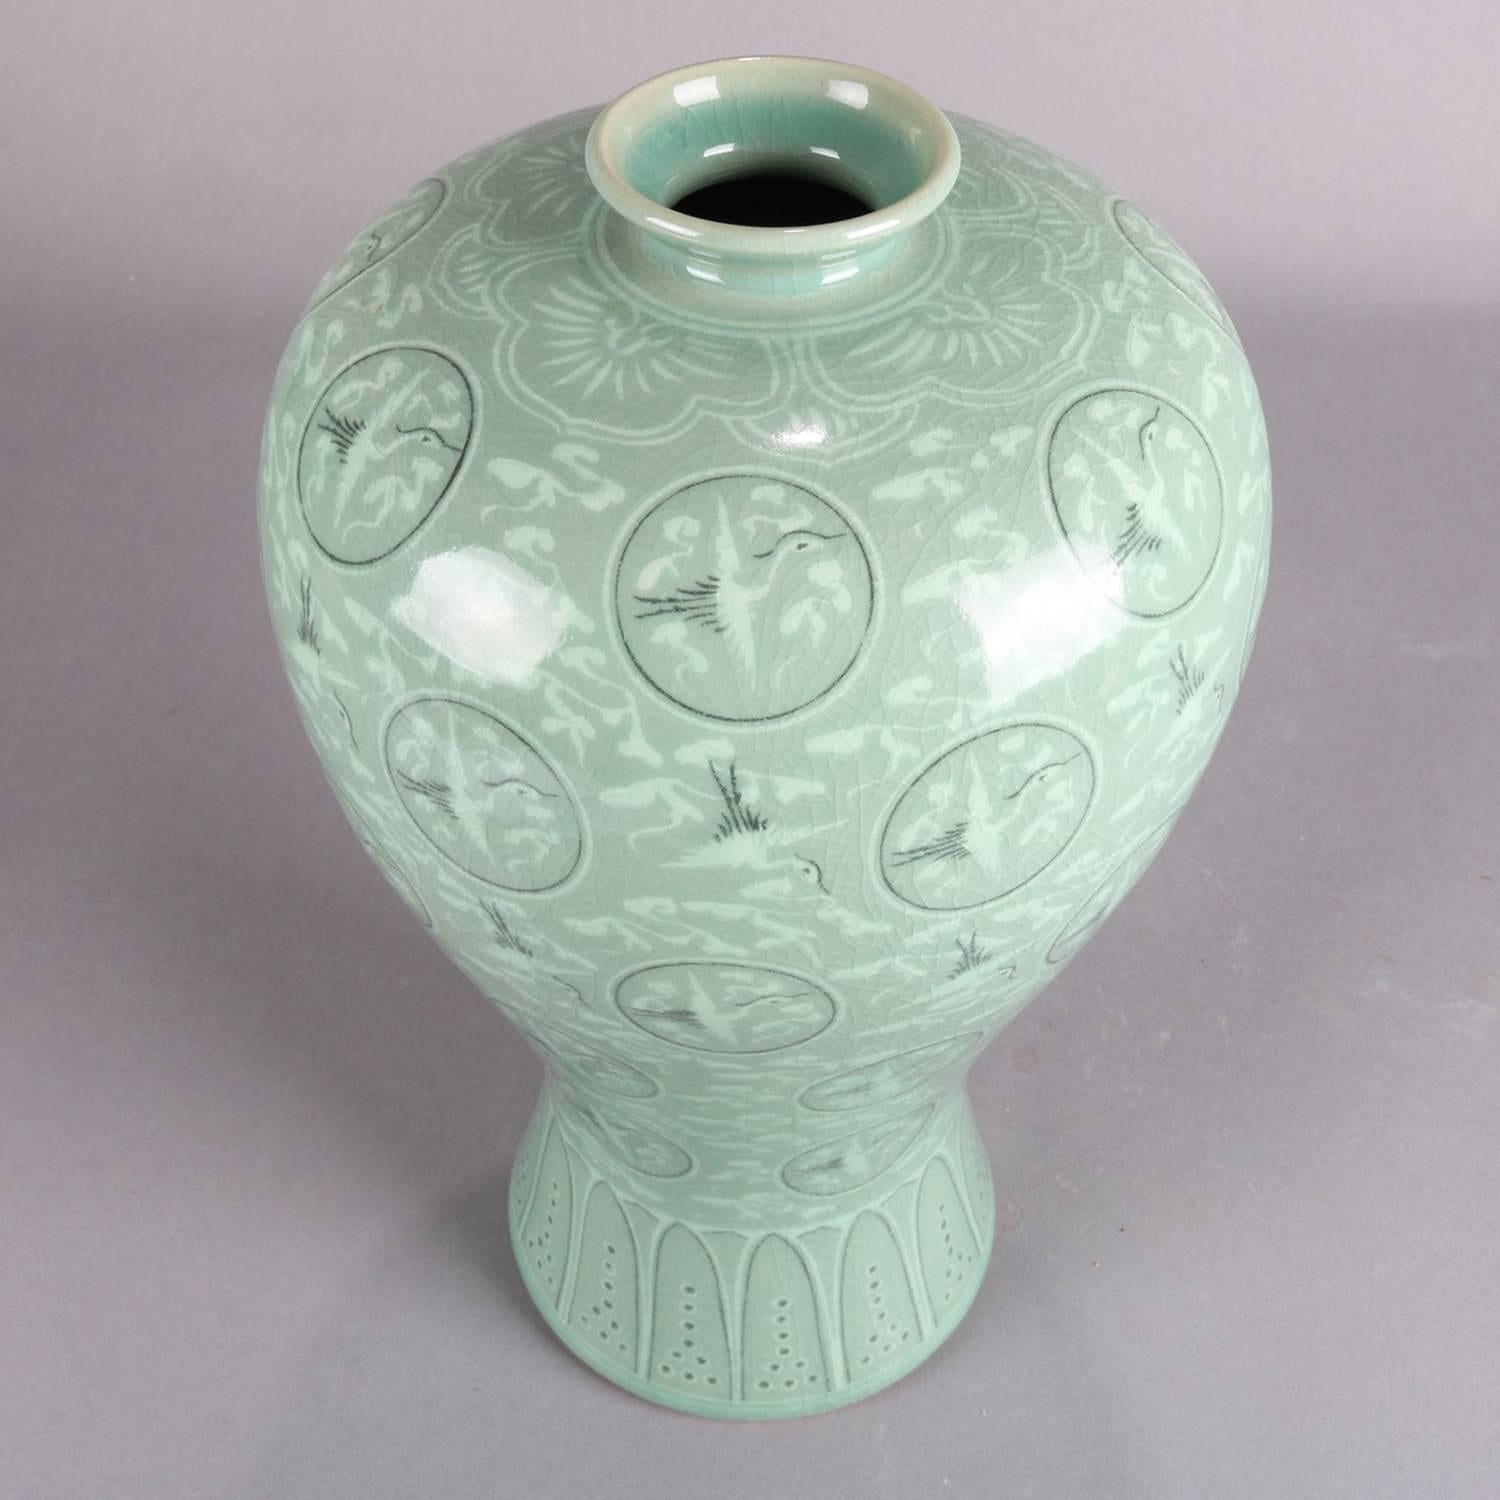 Korean celadon art pottery vase features allover heron and foliate design, floral collar and foliate base design, signed on base, 20th century

Measures: 13